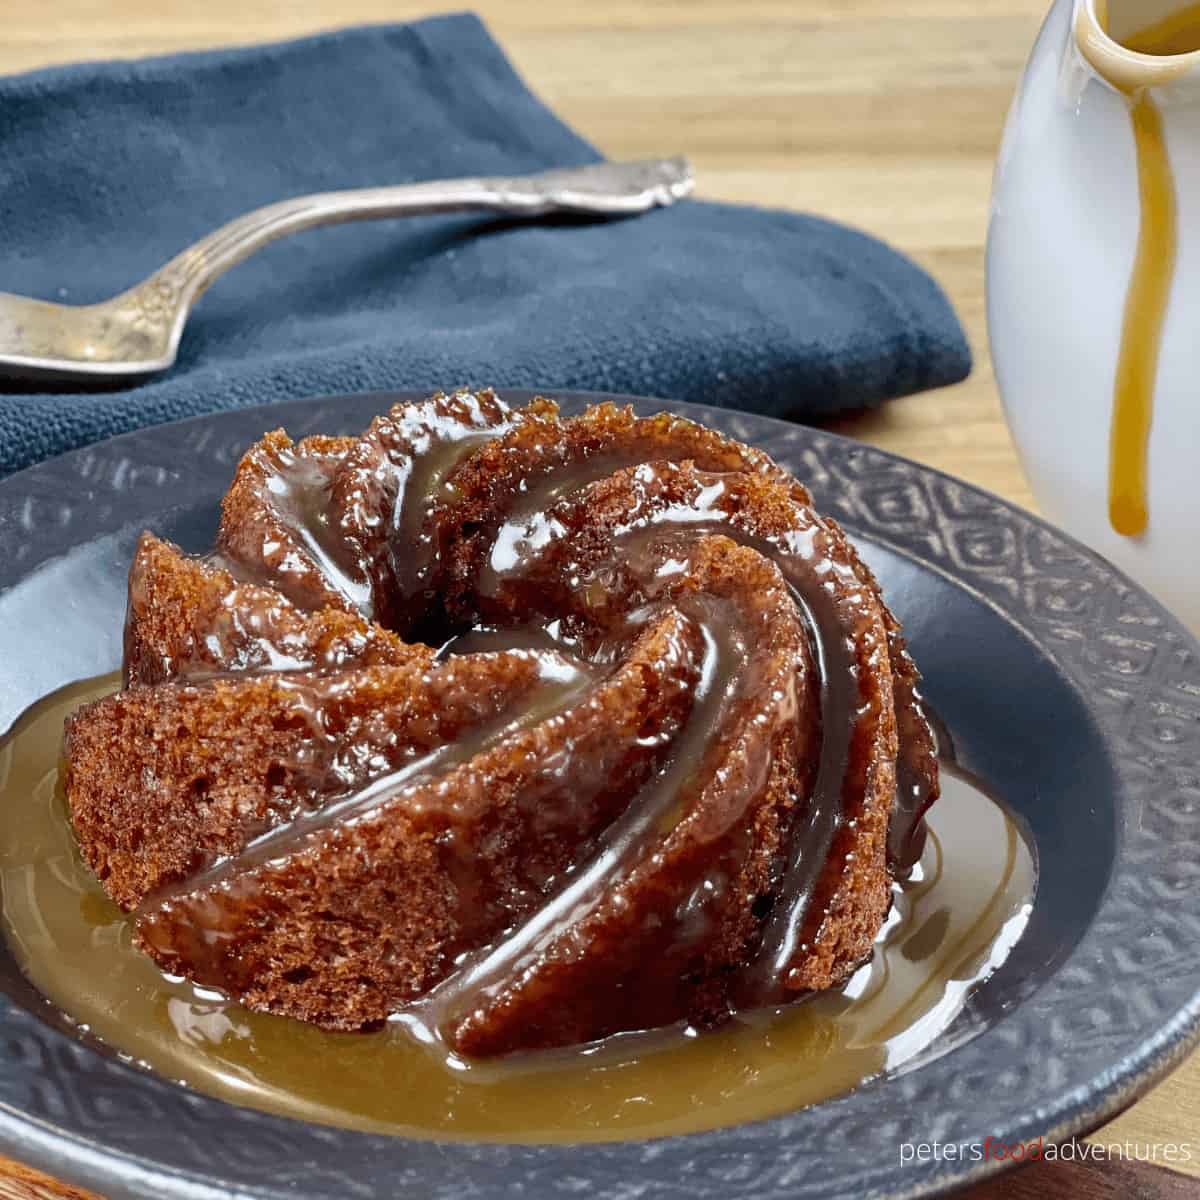 You won't believe this dessert recipe is made with dates! Sticky Date Pudding or Sticky Toffee pudding is a delicious winter treat. Heartwarming to eat, rich and comforting, while drizzled in a warm butterscotch sauce.